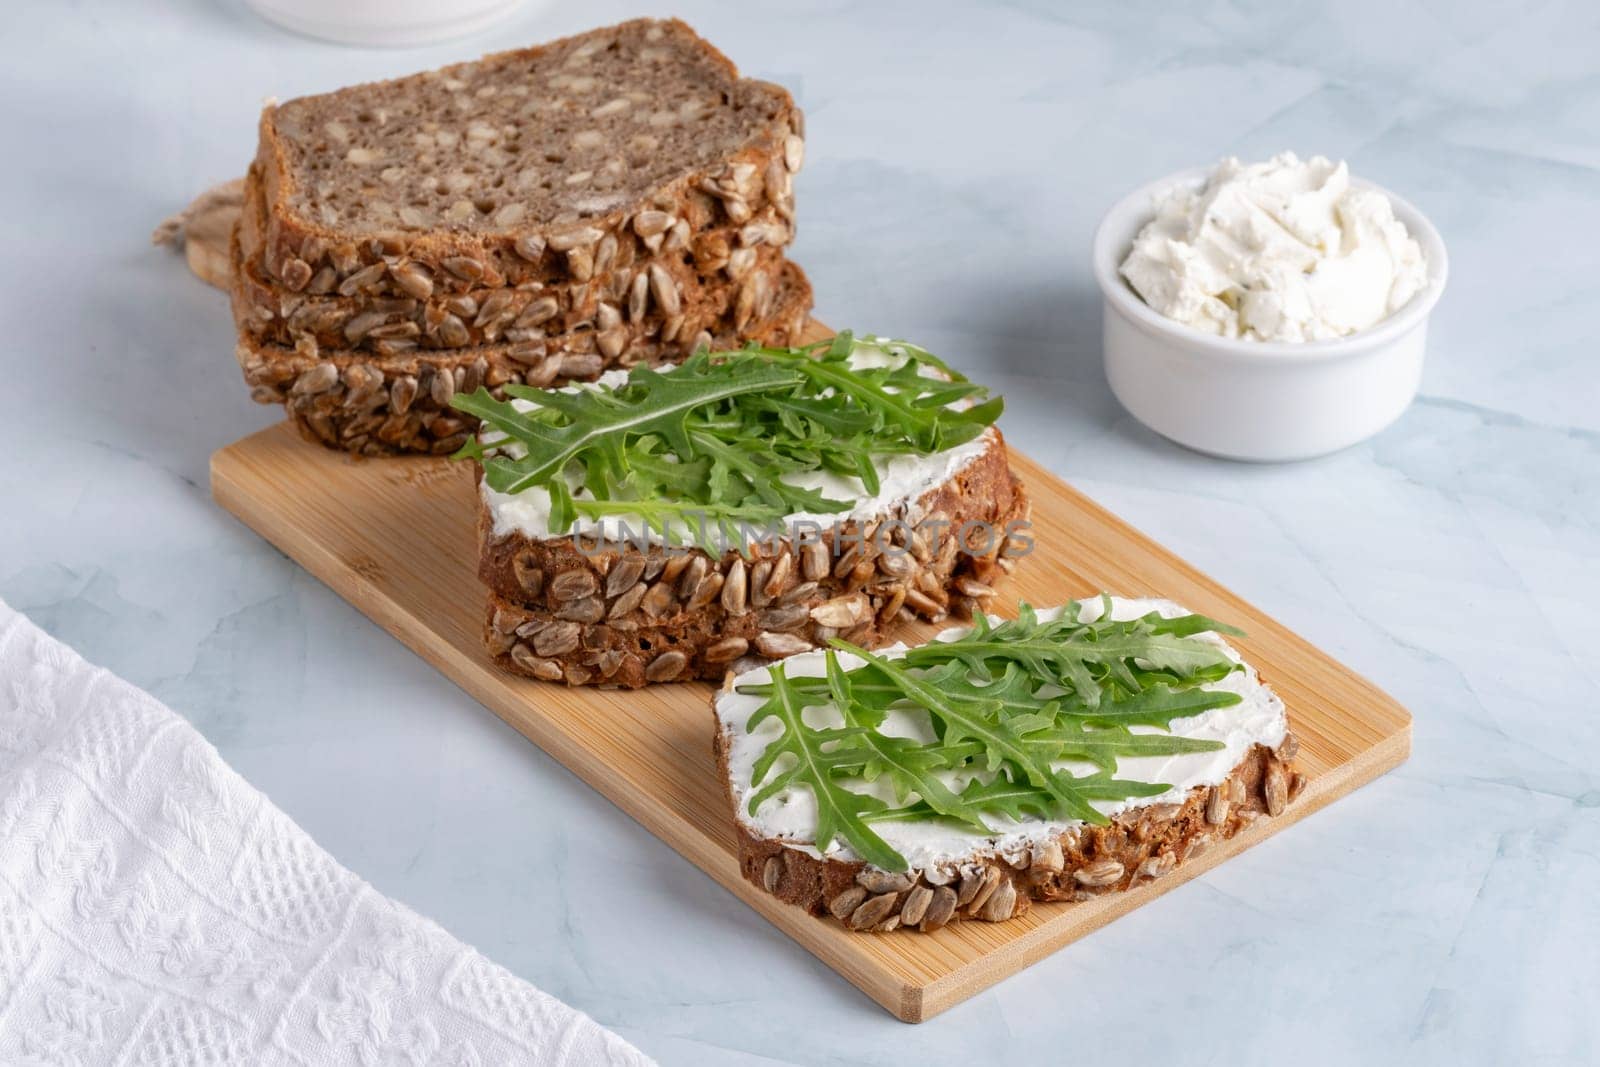 Sandwiches with curd cheese and arugula. Rye bread with seeds.